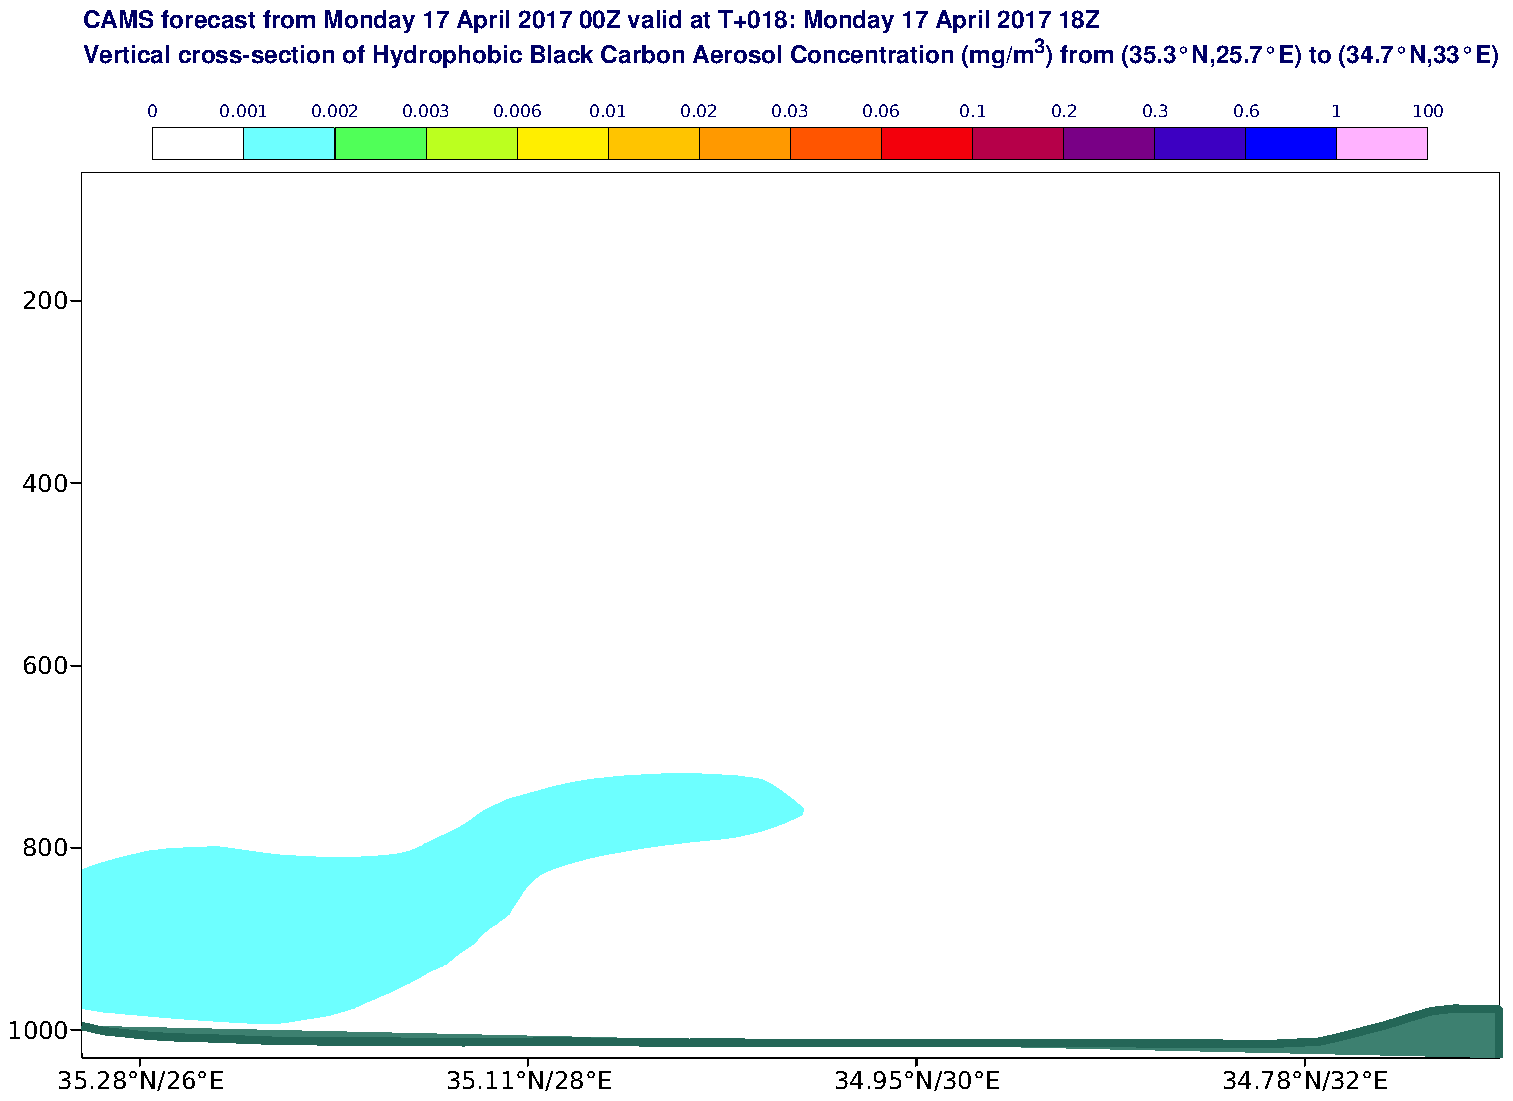 Vertical cross-section of Hydrophobic Black Carbon Aerosol Concentration (mg/m3) valid at T18 - 2017-04-17 18:00